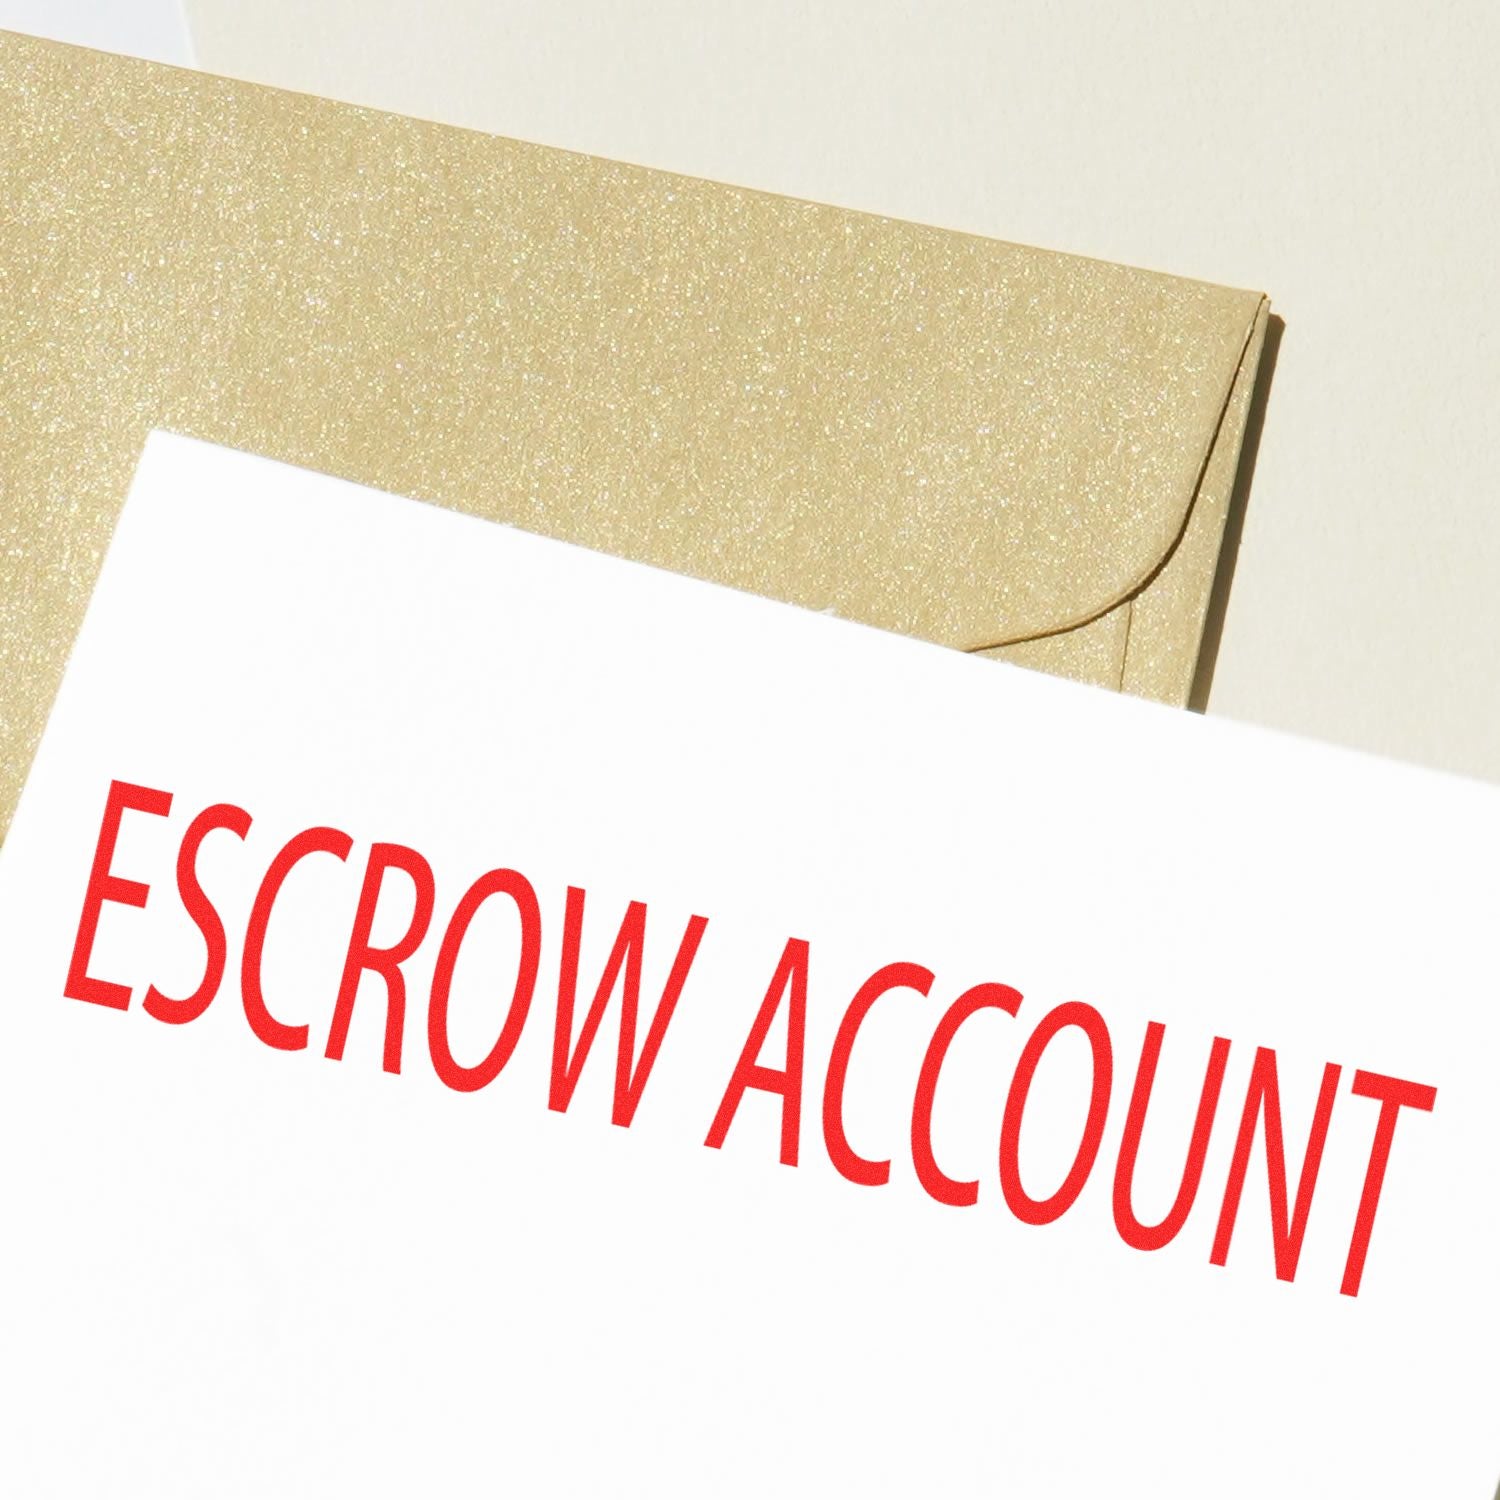 Large Pre-Inked Escrow Account Stamp In Use Photo